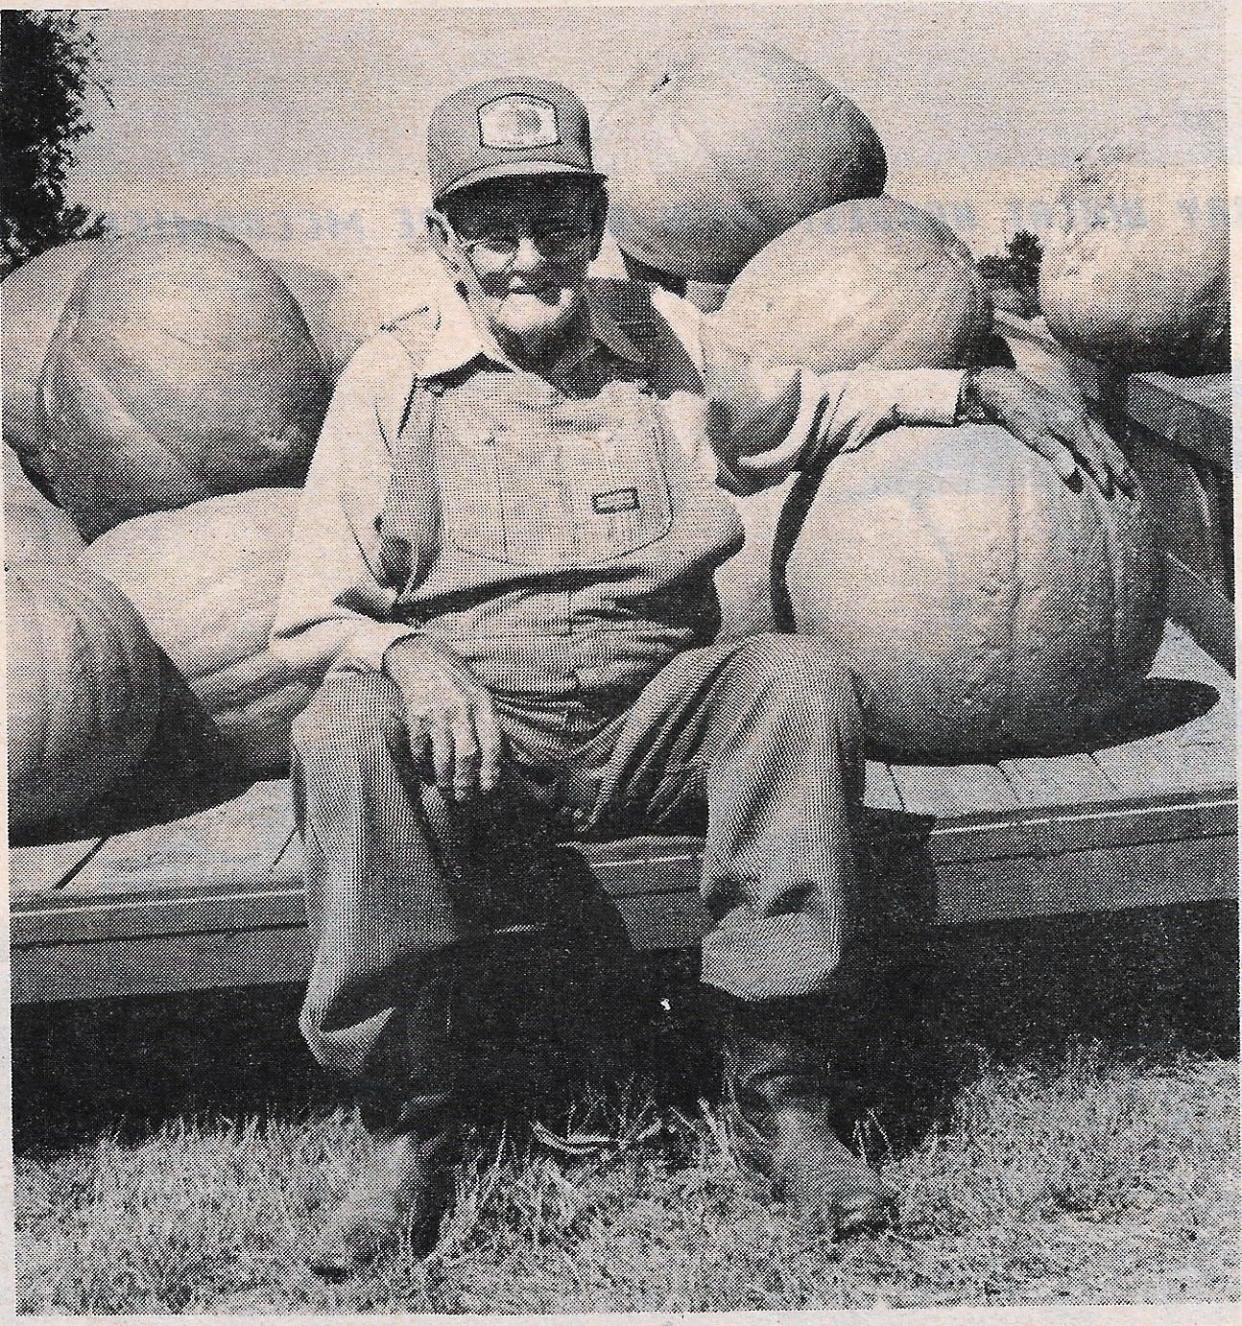 B.A. “Slim” Robertson (1904-1989), pioneer commercial producer of pumpkins in Floyd County.